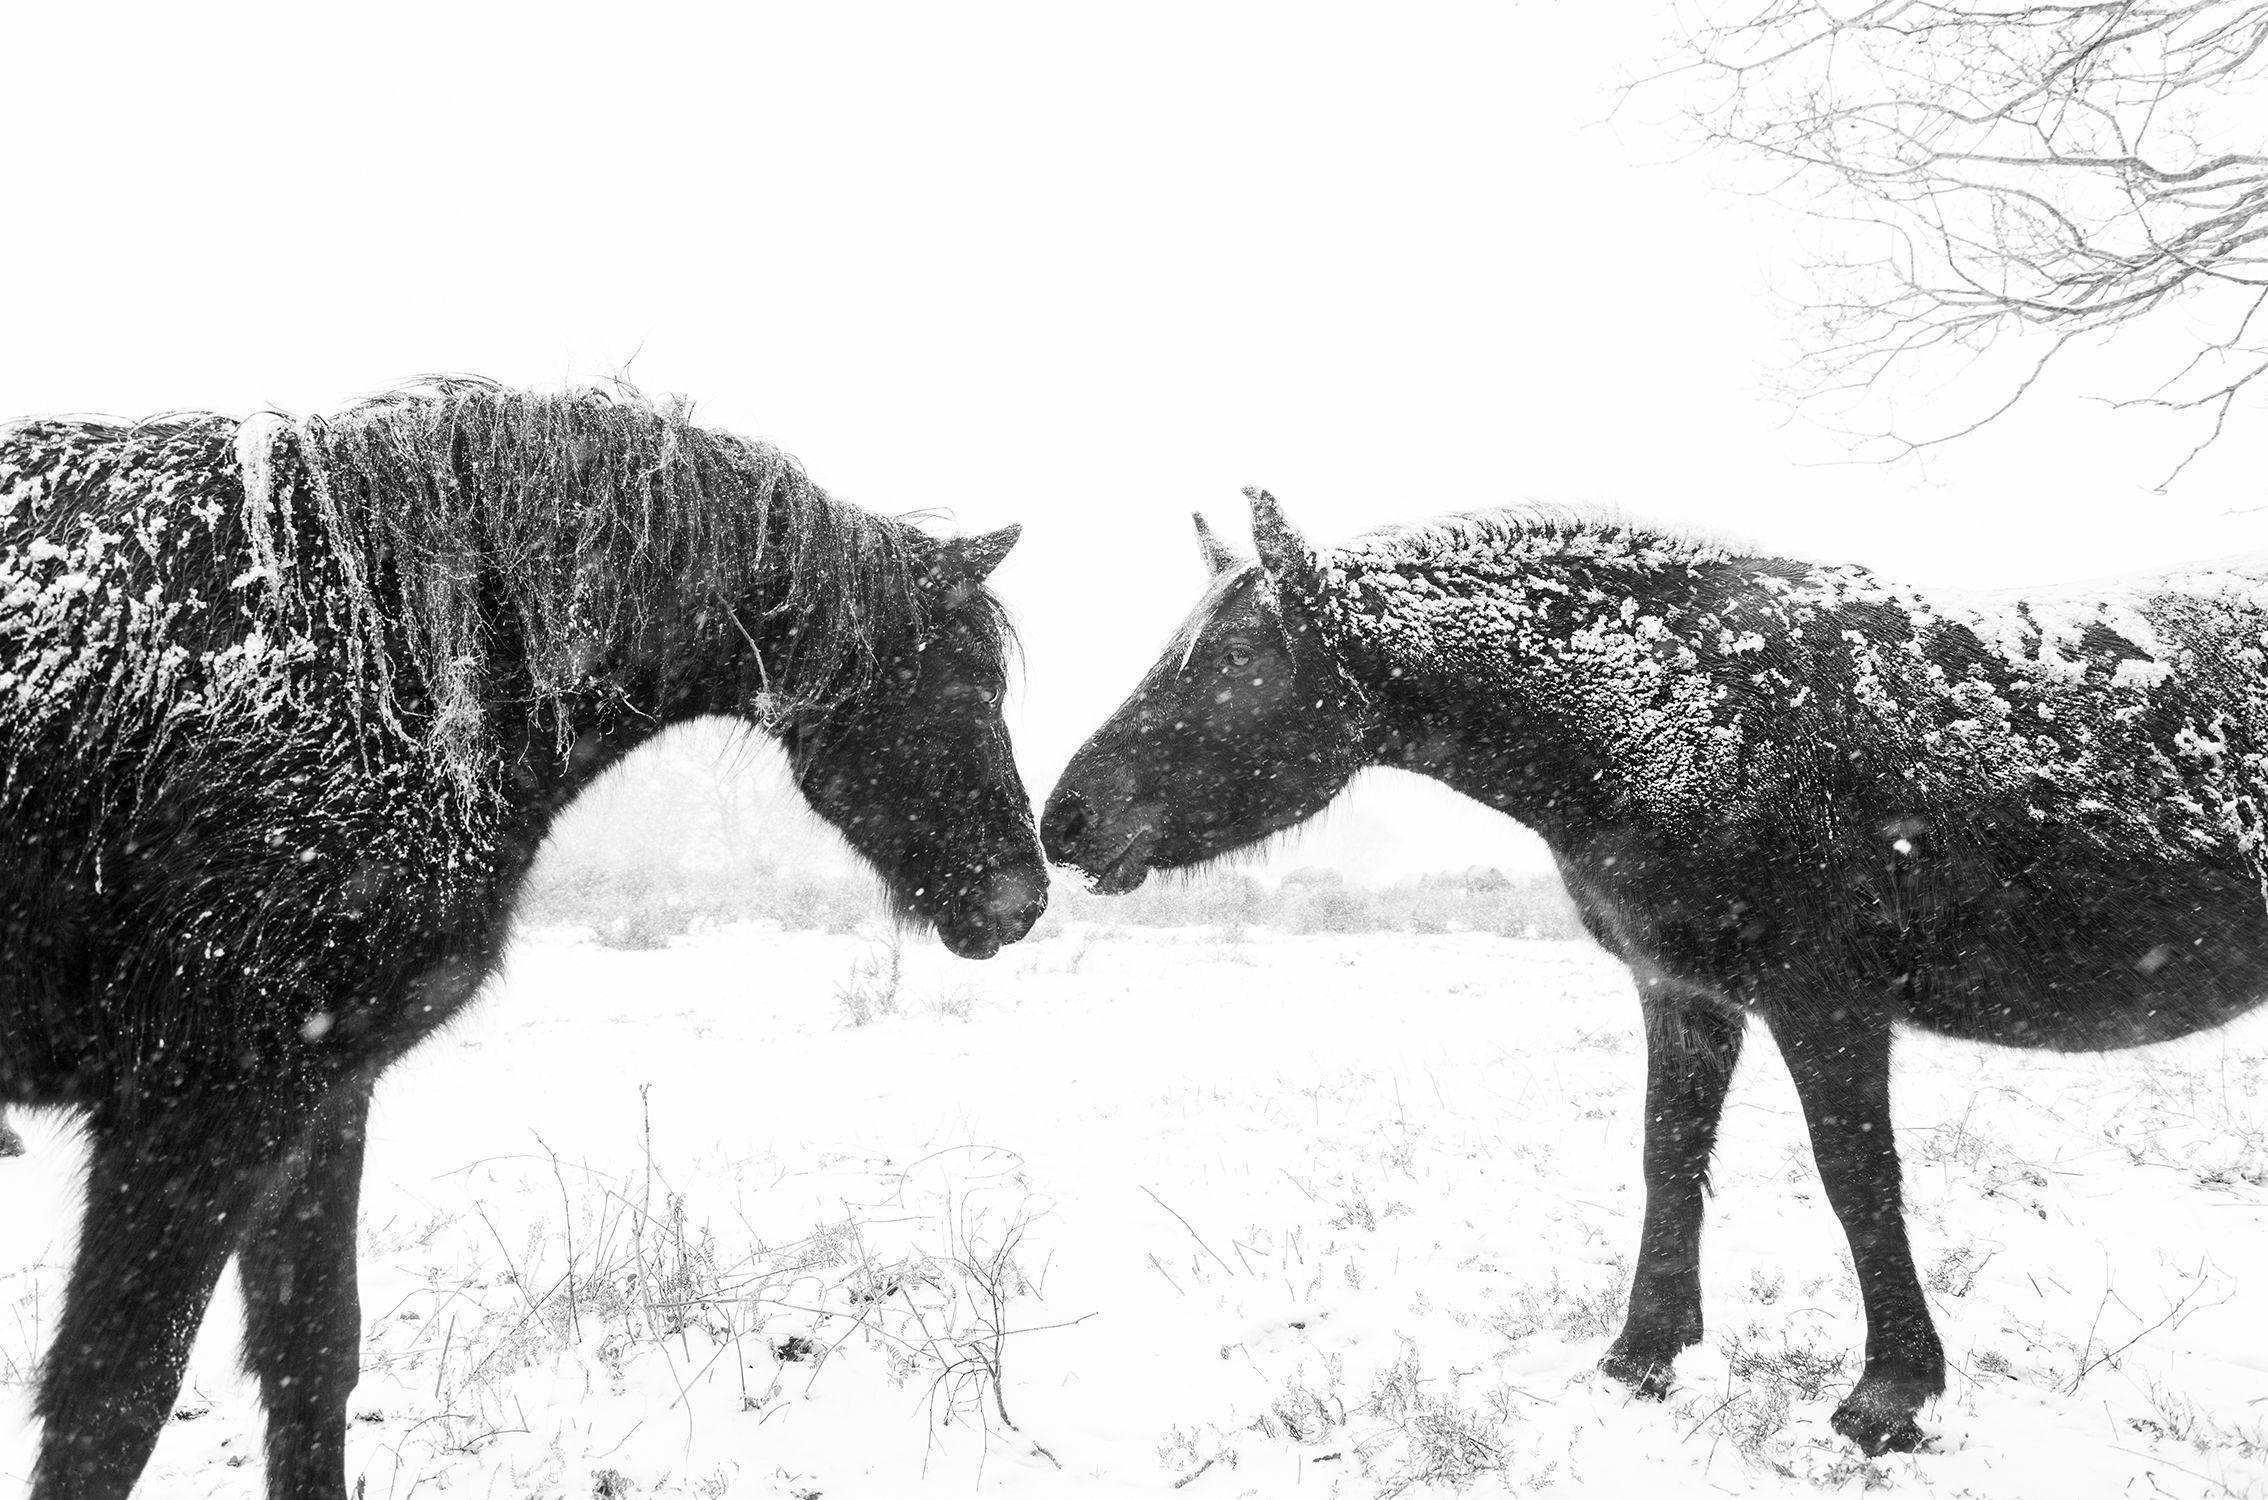 Andrew Lever Black and White Photograph - SNOW HORSES, Photograph, C-Type